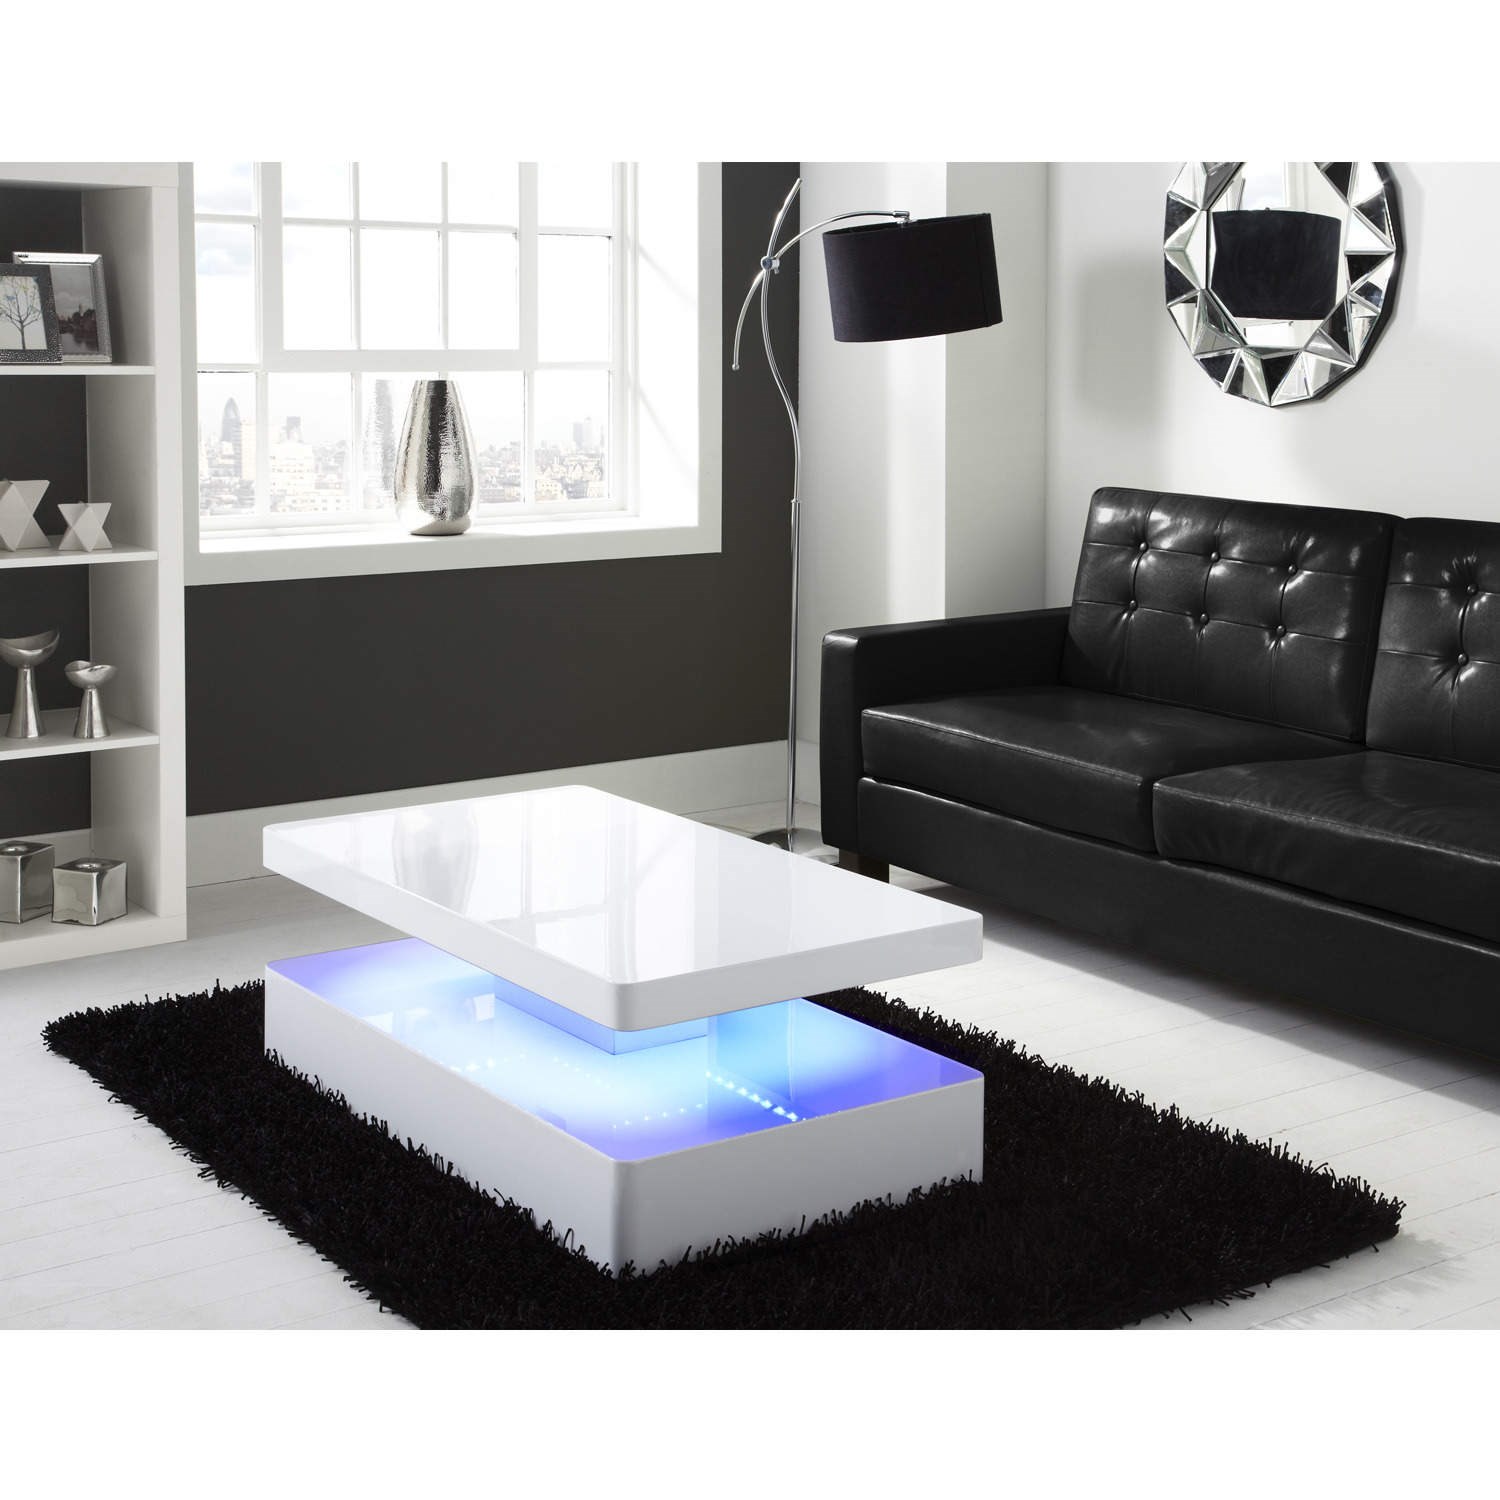 4 Steps To Integrating An Illuminated Coffee Table Into Your Interior